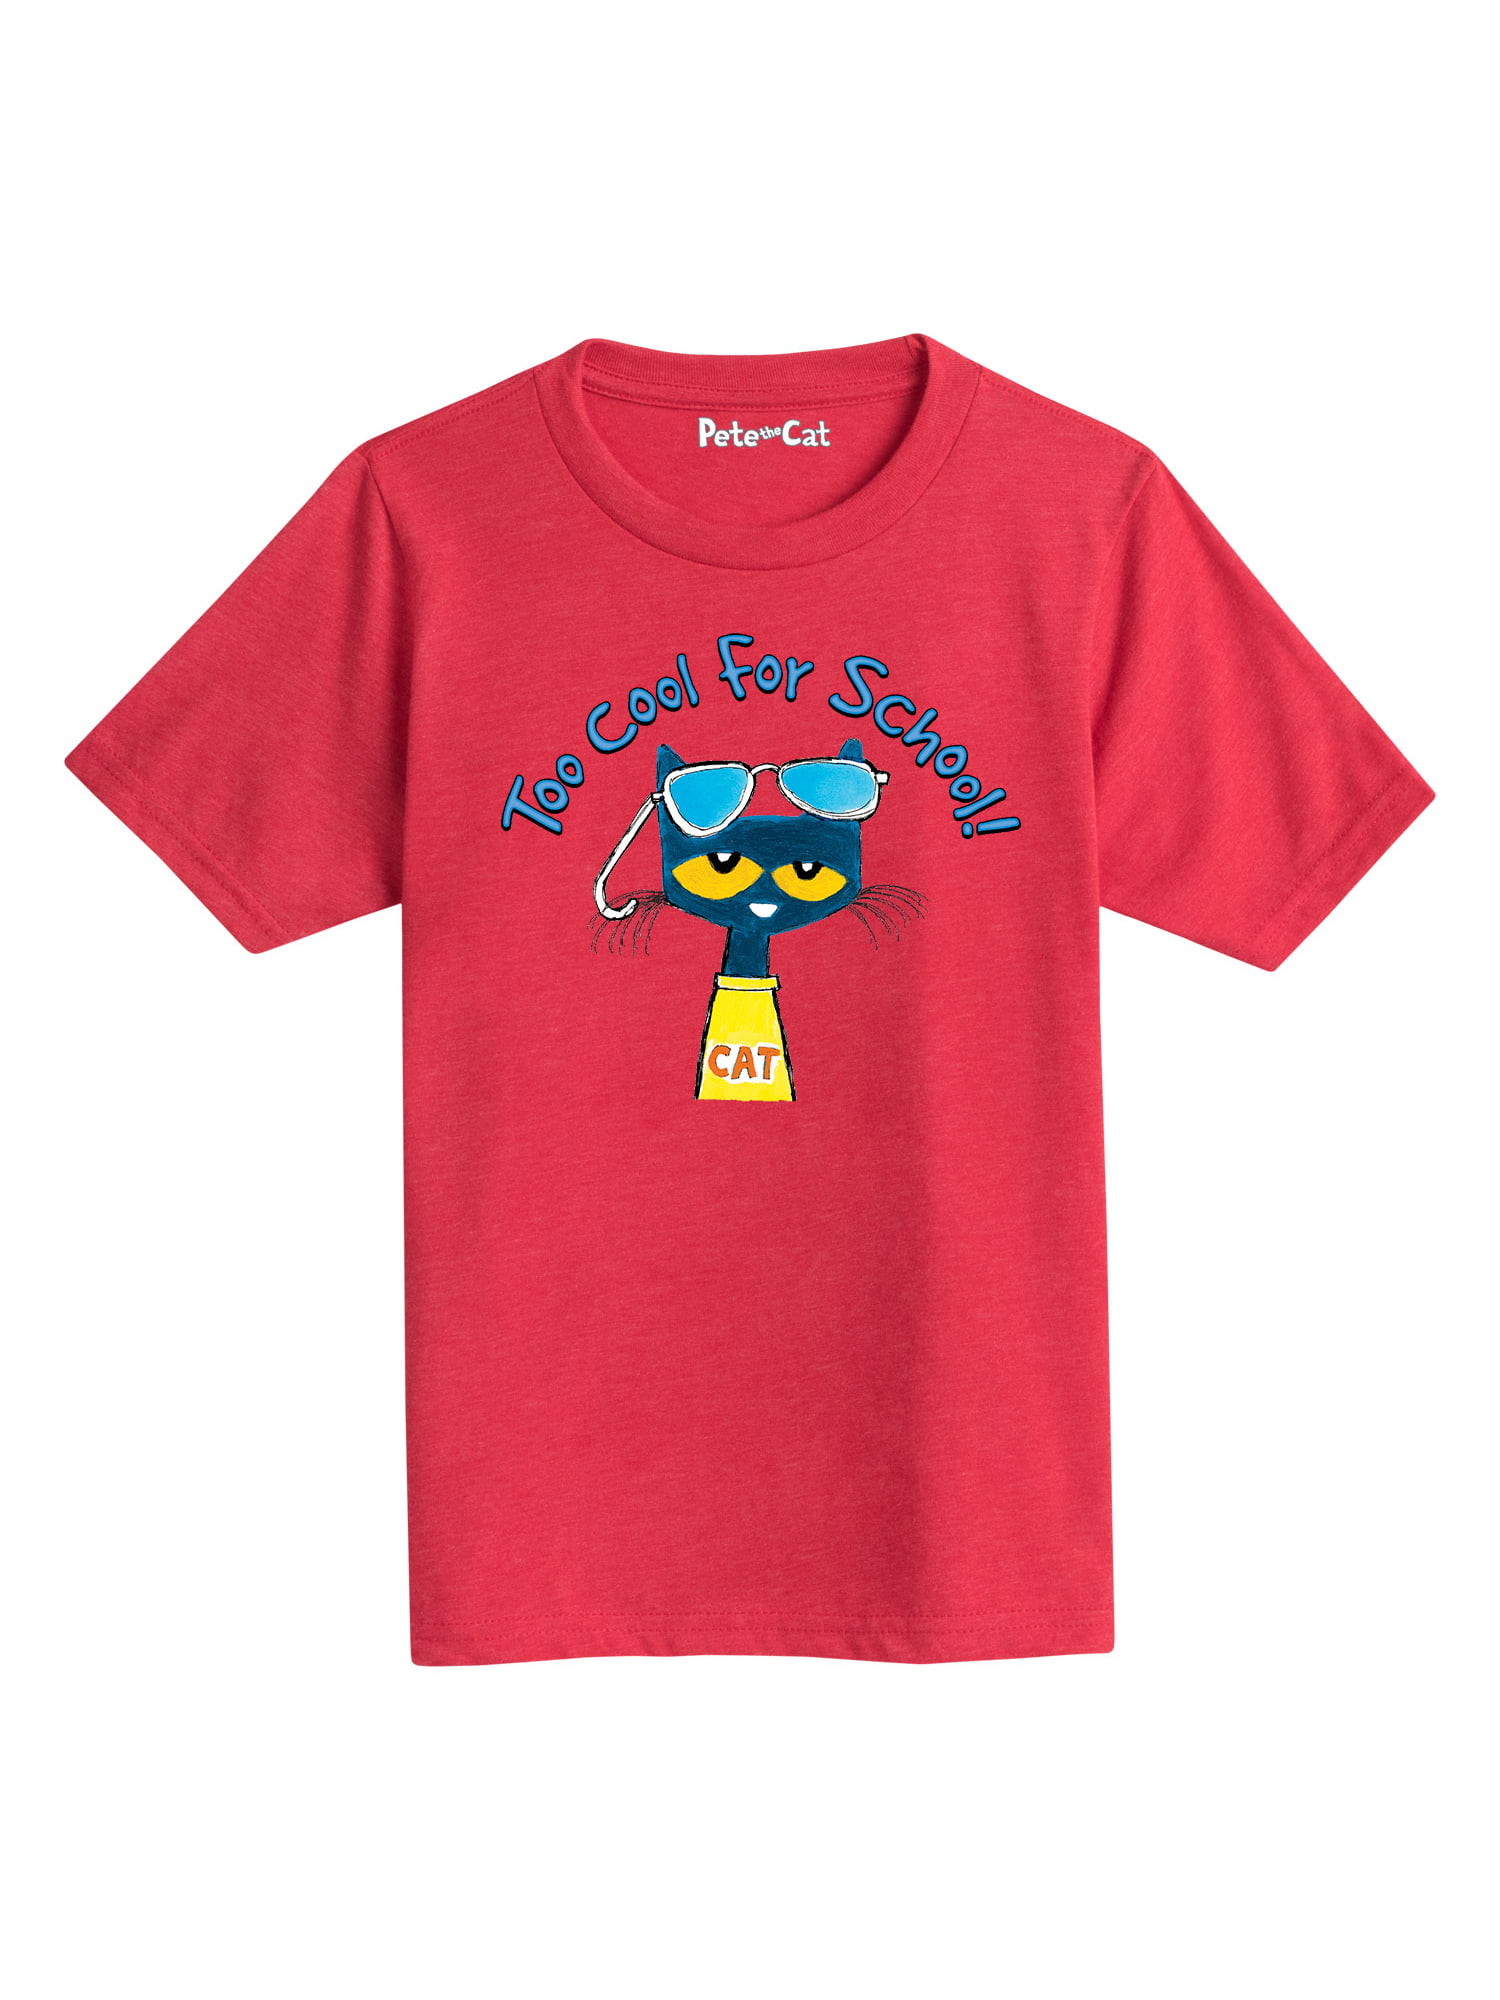 Pete The Cat - Too Cool For School Multi - Youth Short Sleeve Graphic T ...